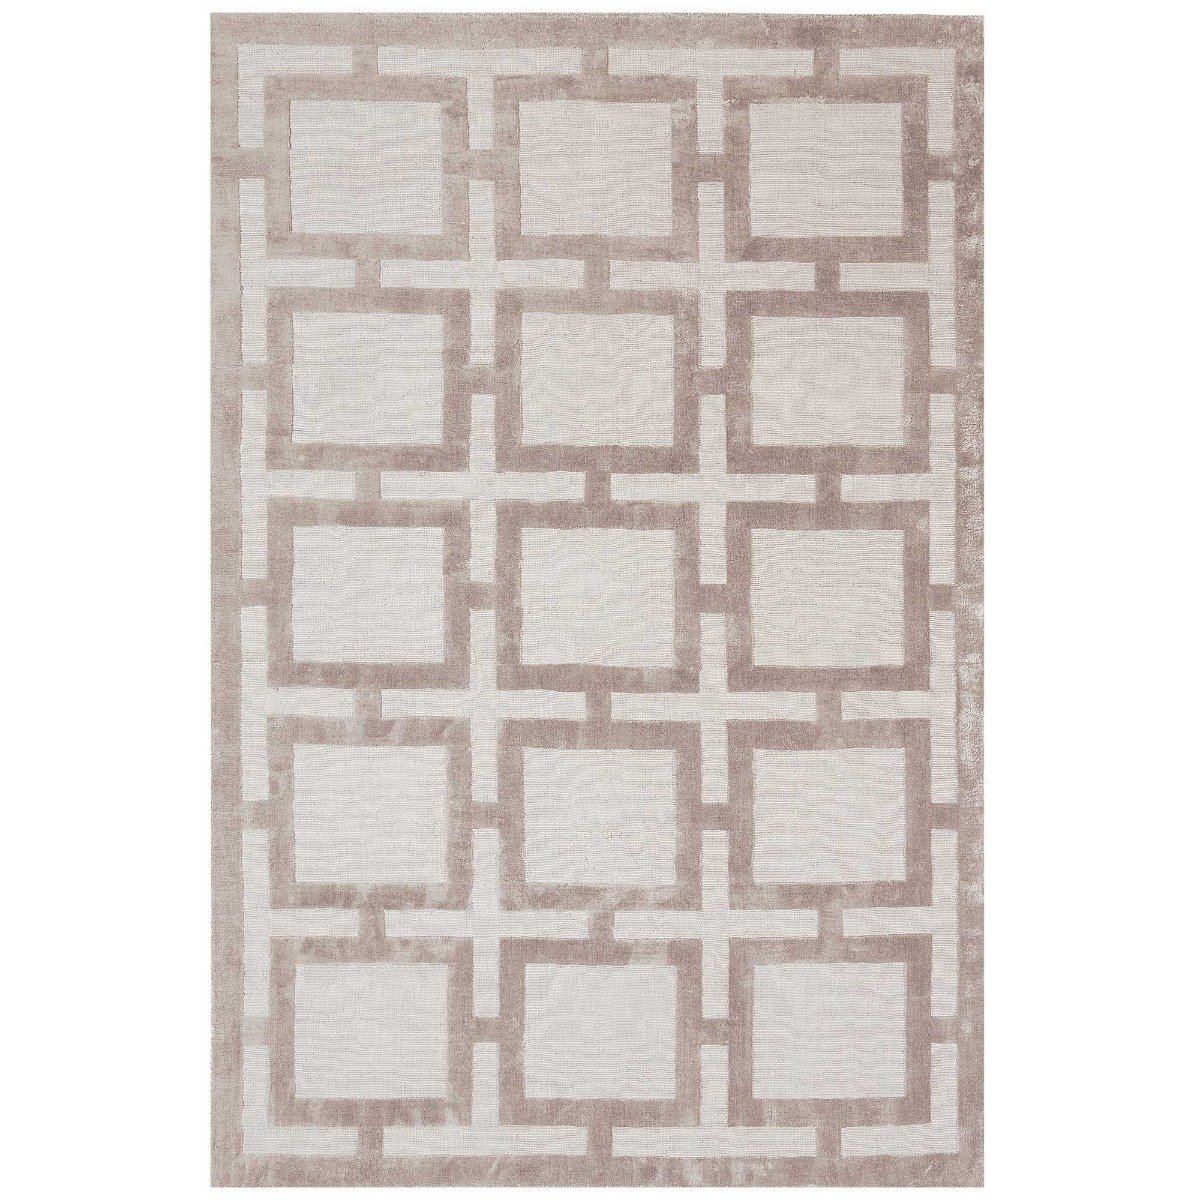 Eaton Biscuit 170x240cm Rug, Square | W170cm | Barker & Stonehouse